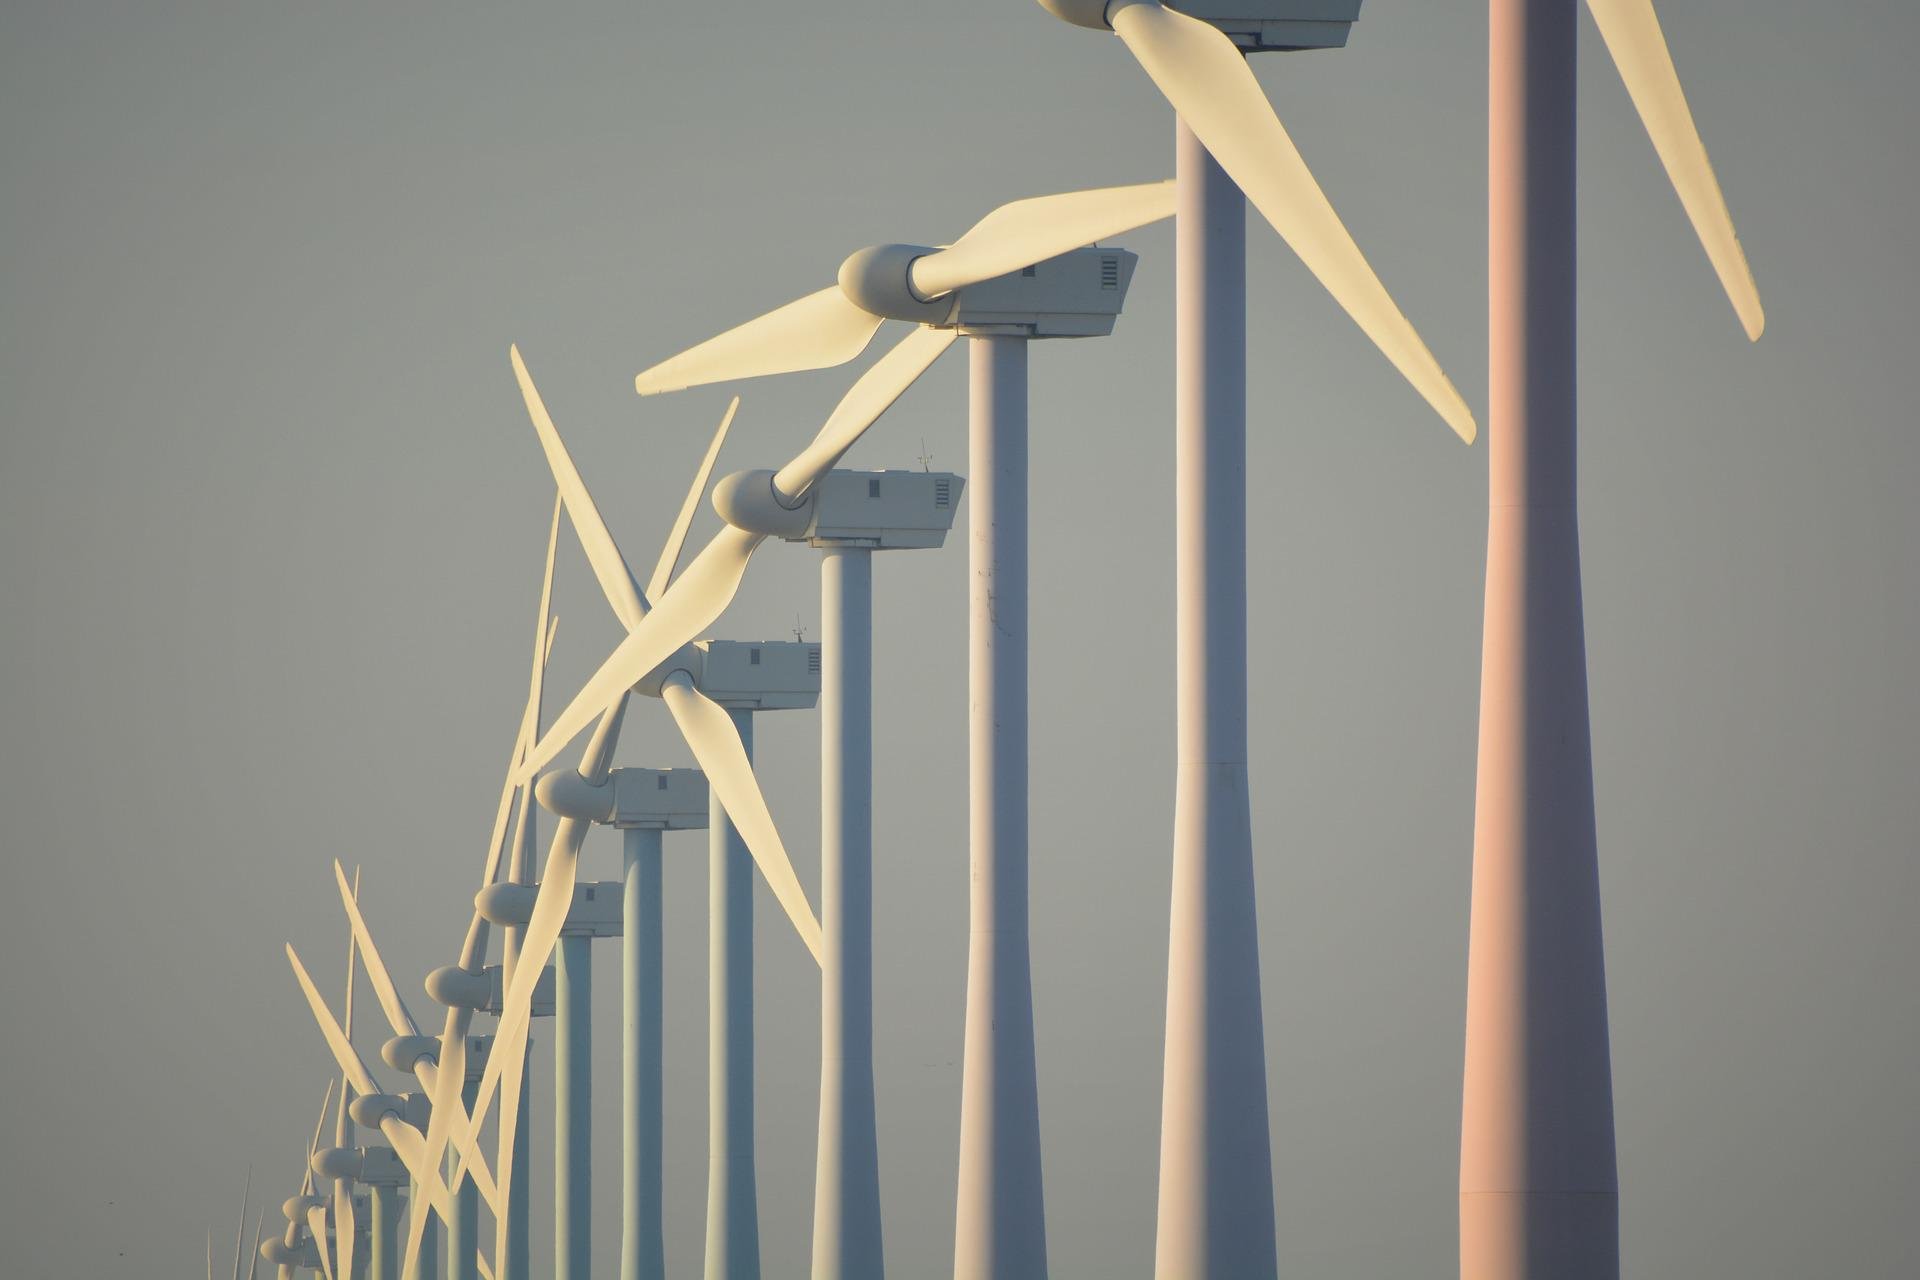 'Nice plans, but 11 gigawatts of more wind power by 2030 is simply not feasible'